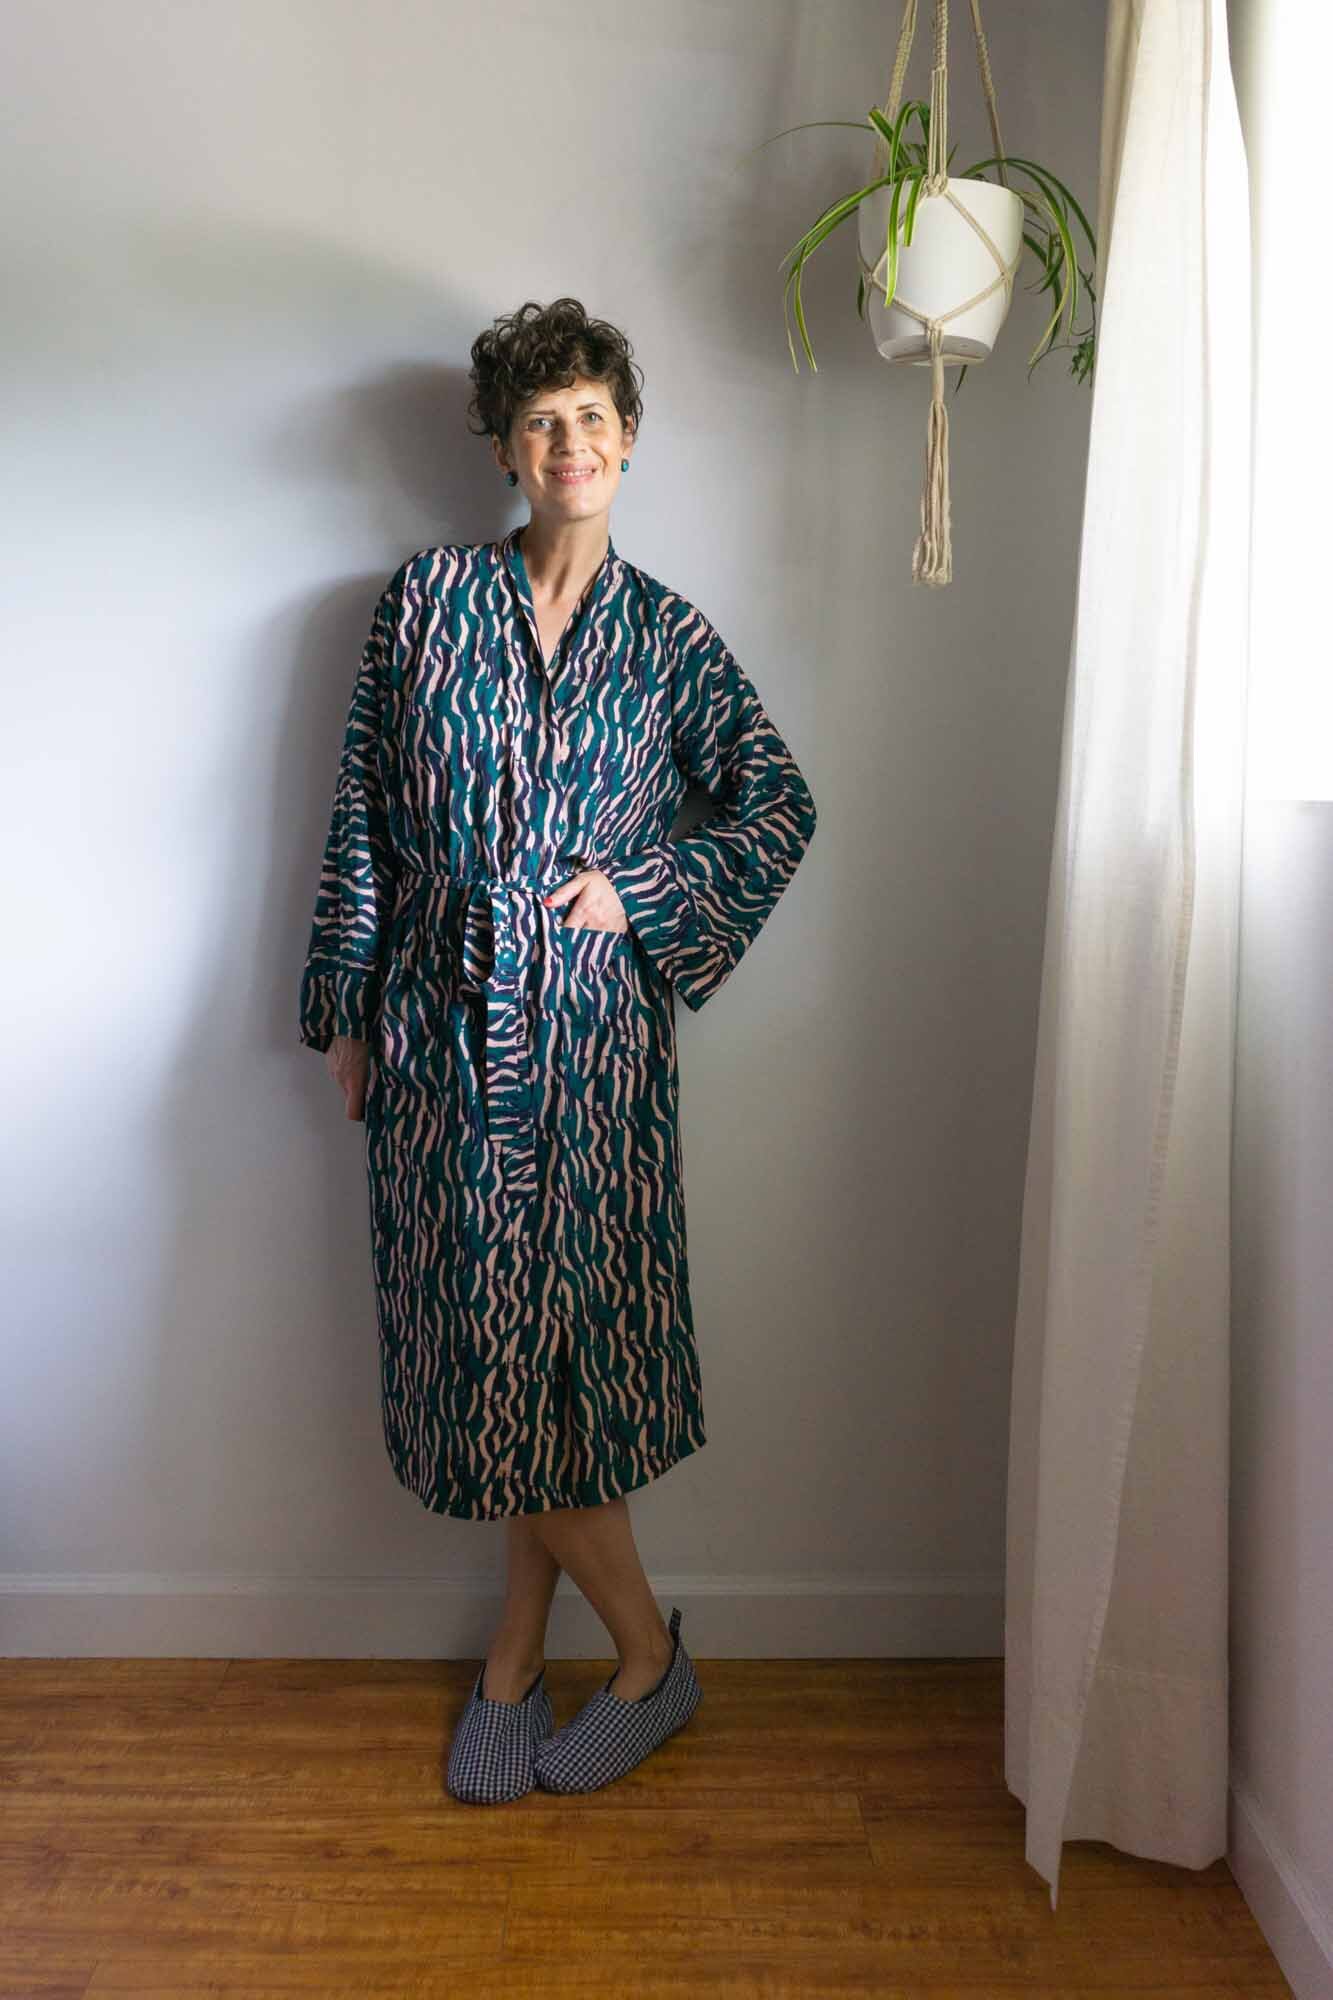 Adult Dress Sewing Patterns